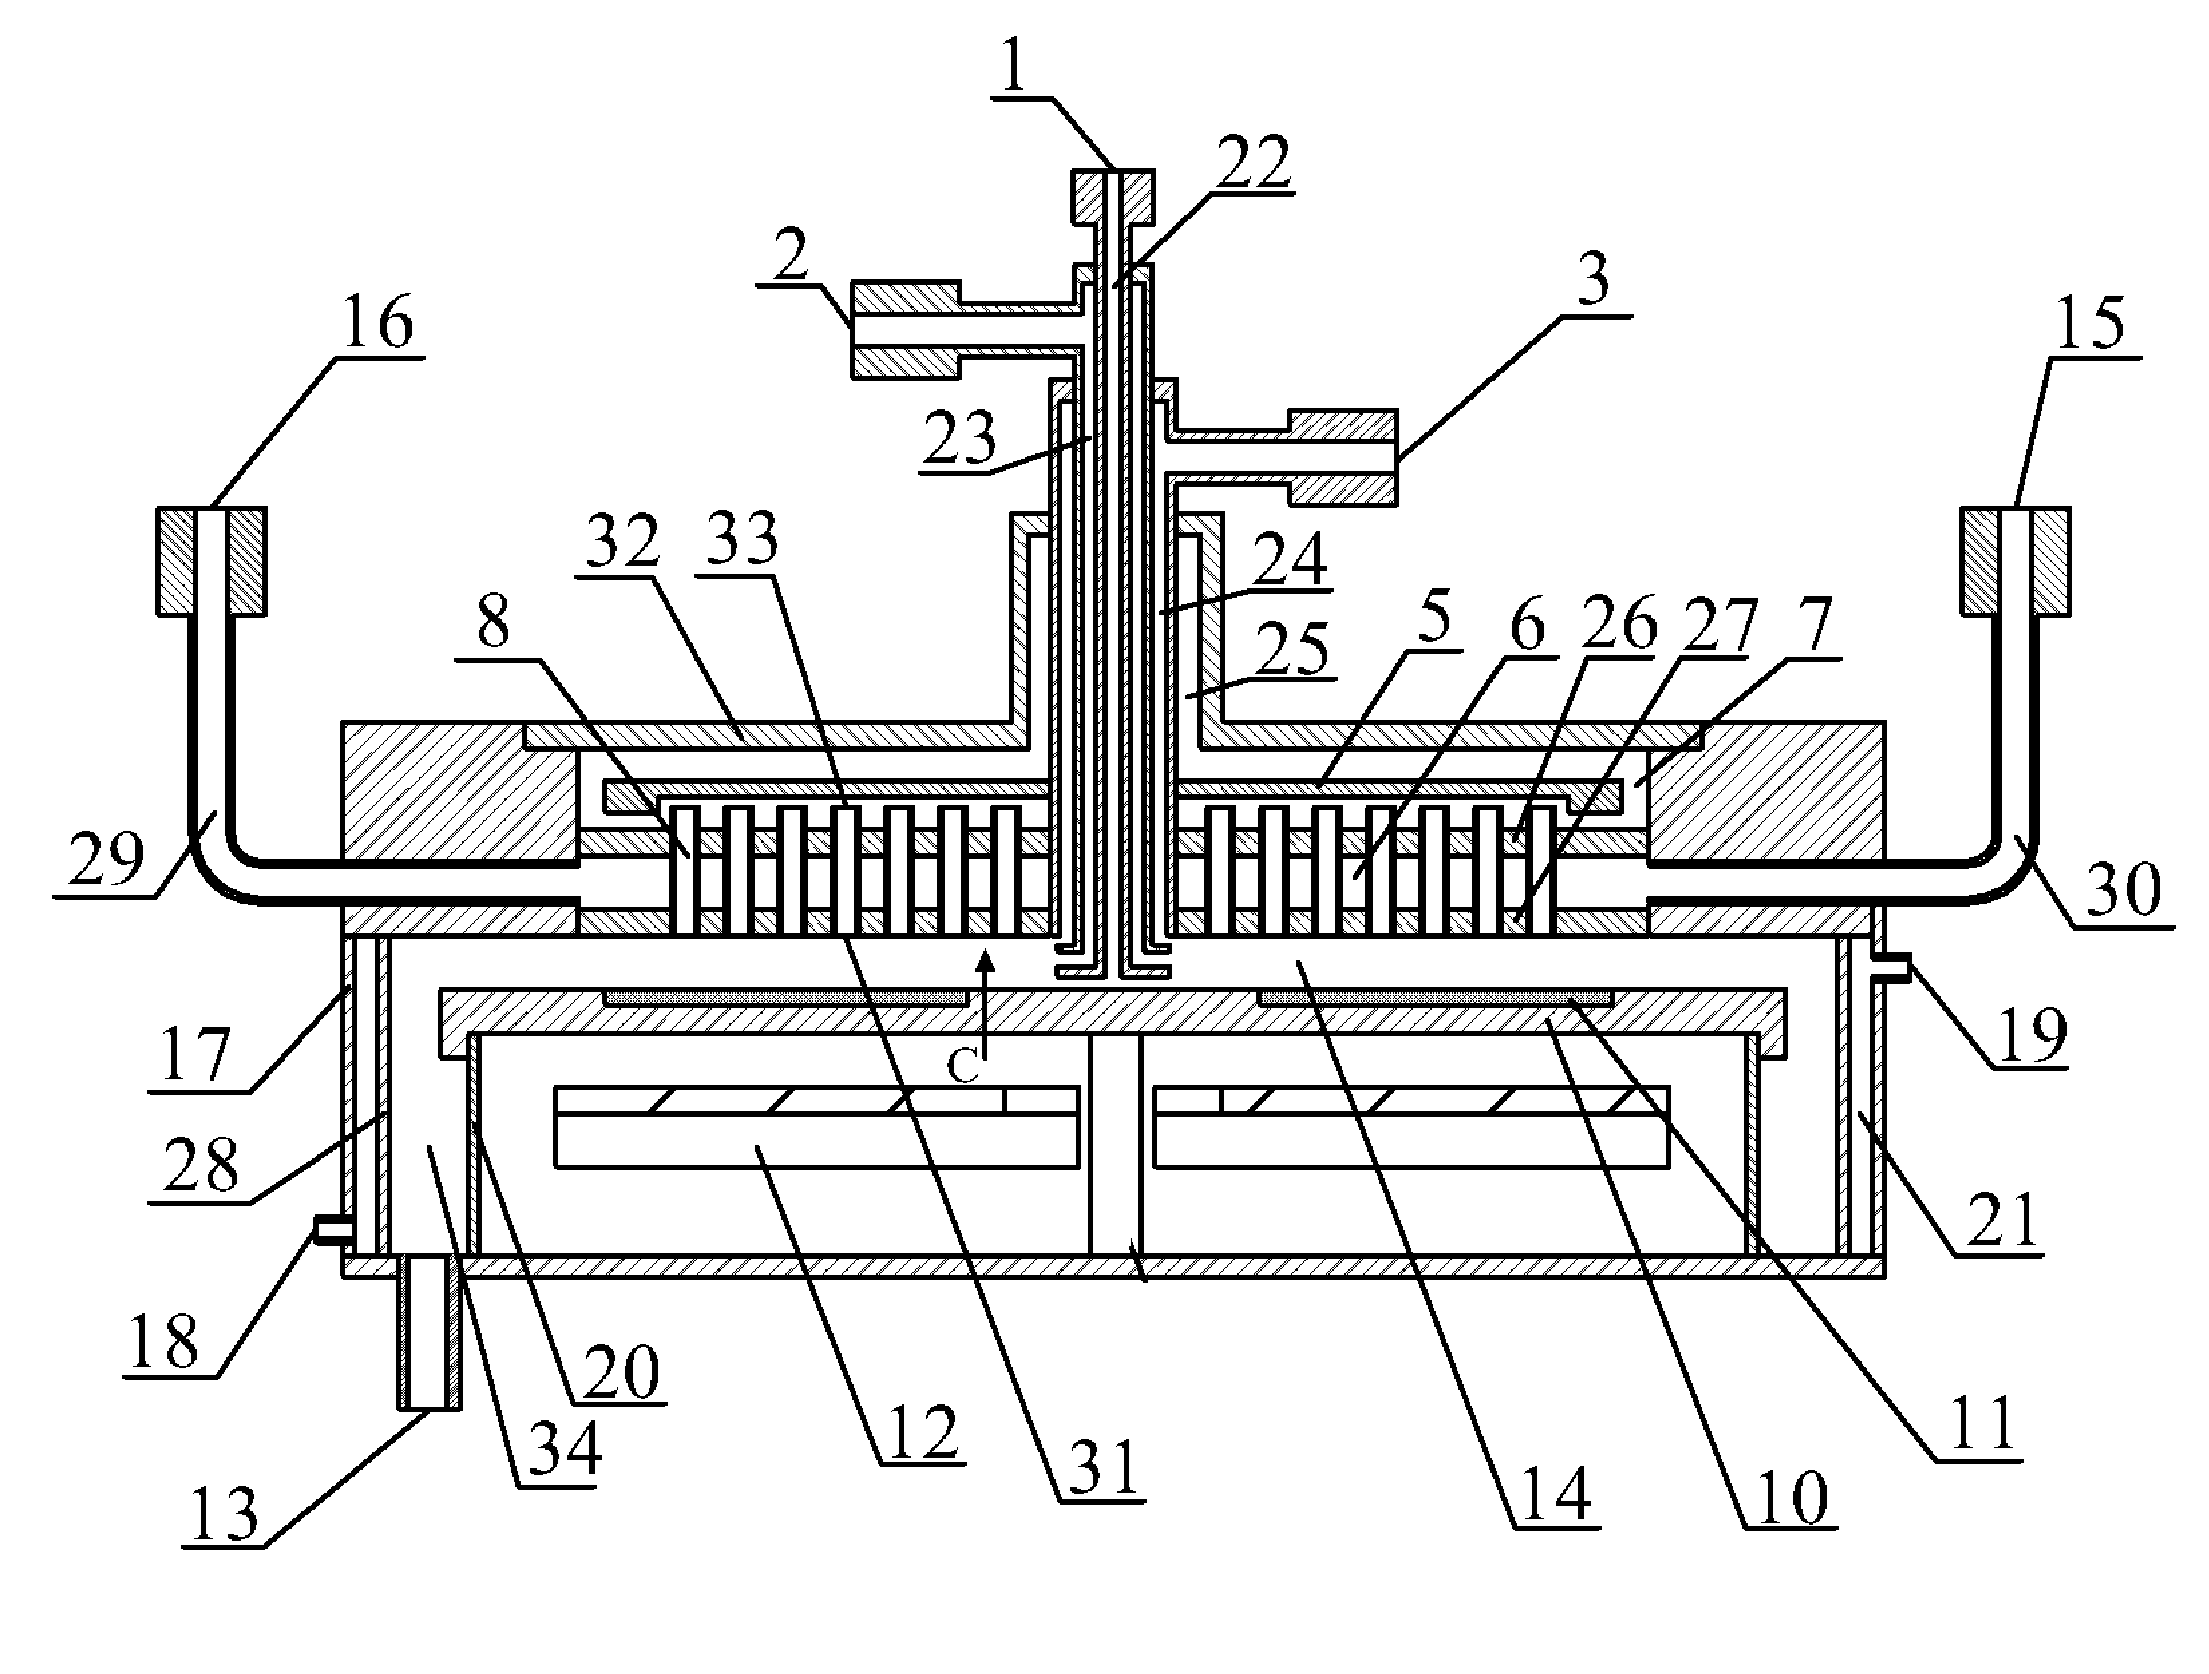 Methods and apparatus for epitaxial growth of semiconductor materials